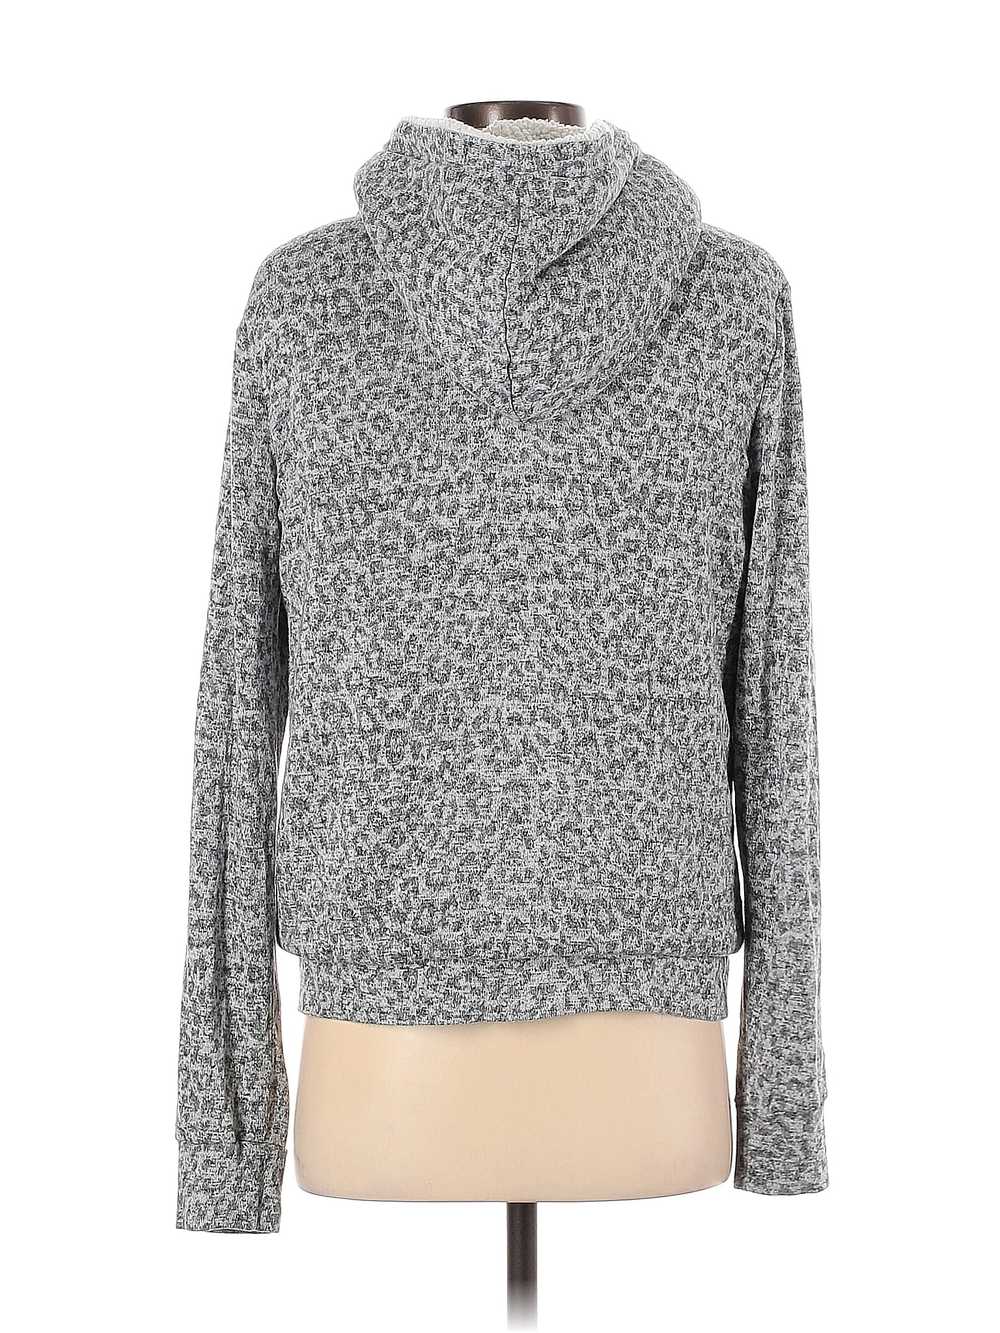 B Collection by Bobeau Women Gray Zip Up Hoodie S - image 2